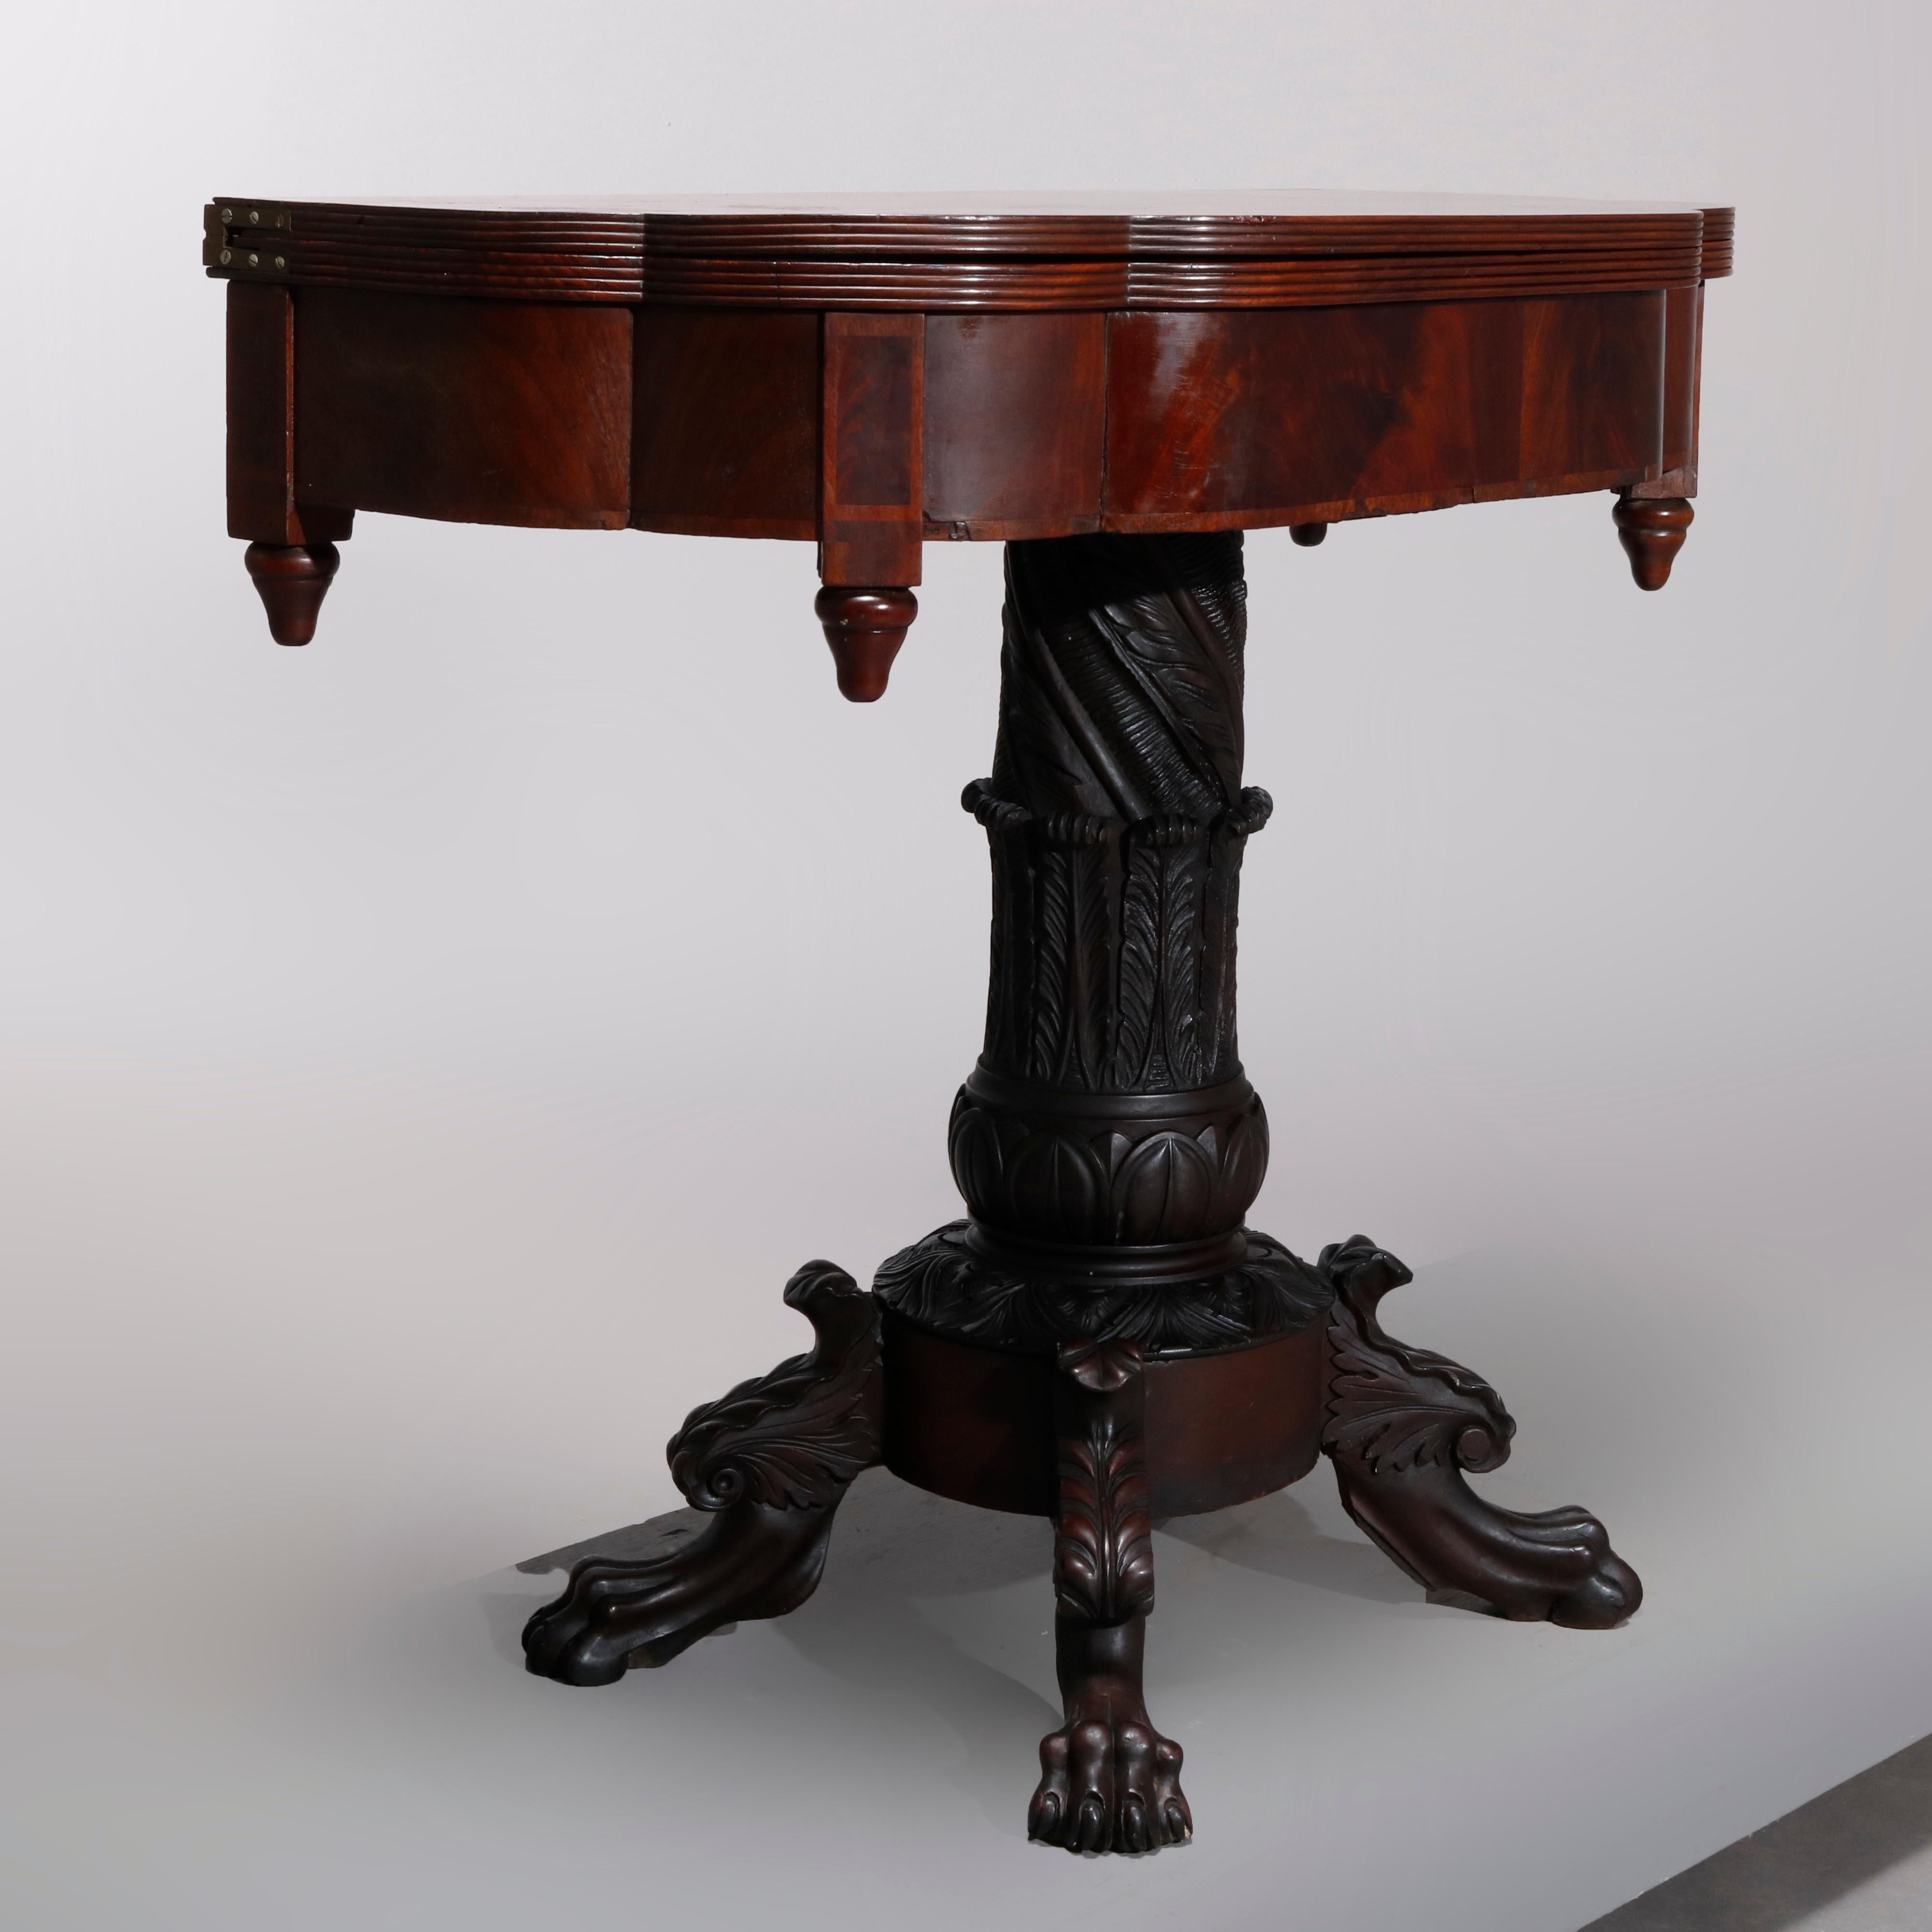 Antique American Empire Deeply Carved Flame Mahogany Game Table, circa 1840 1